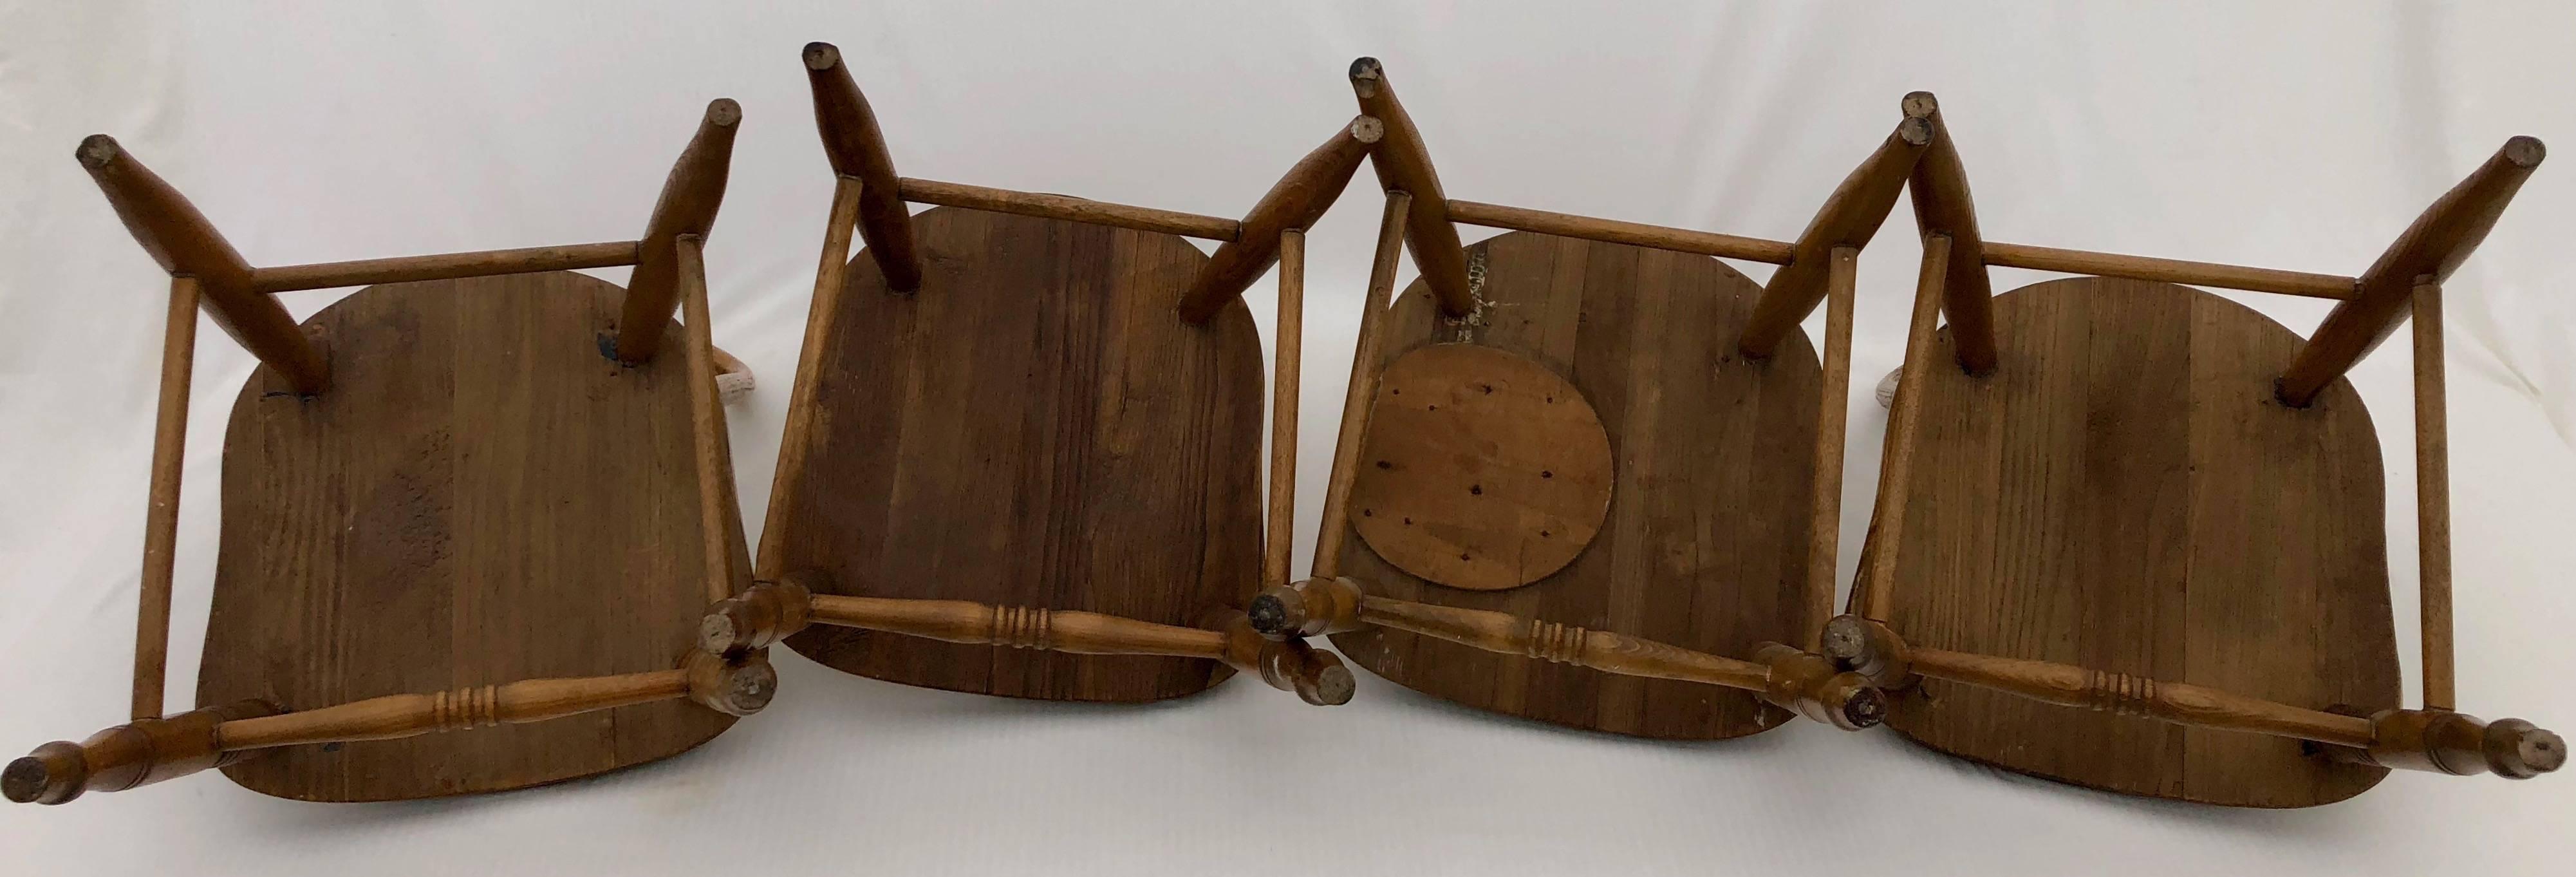 20th Century Set of Four Wooden Children's Chairs with Spindle and Rounded Backs, 1900s For Sale